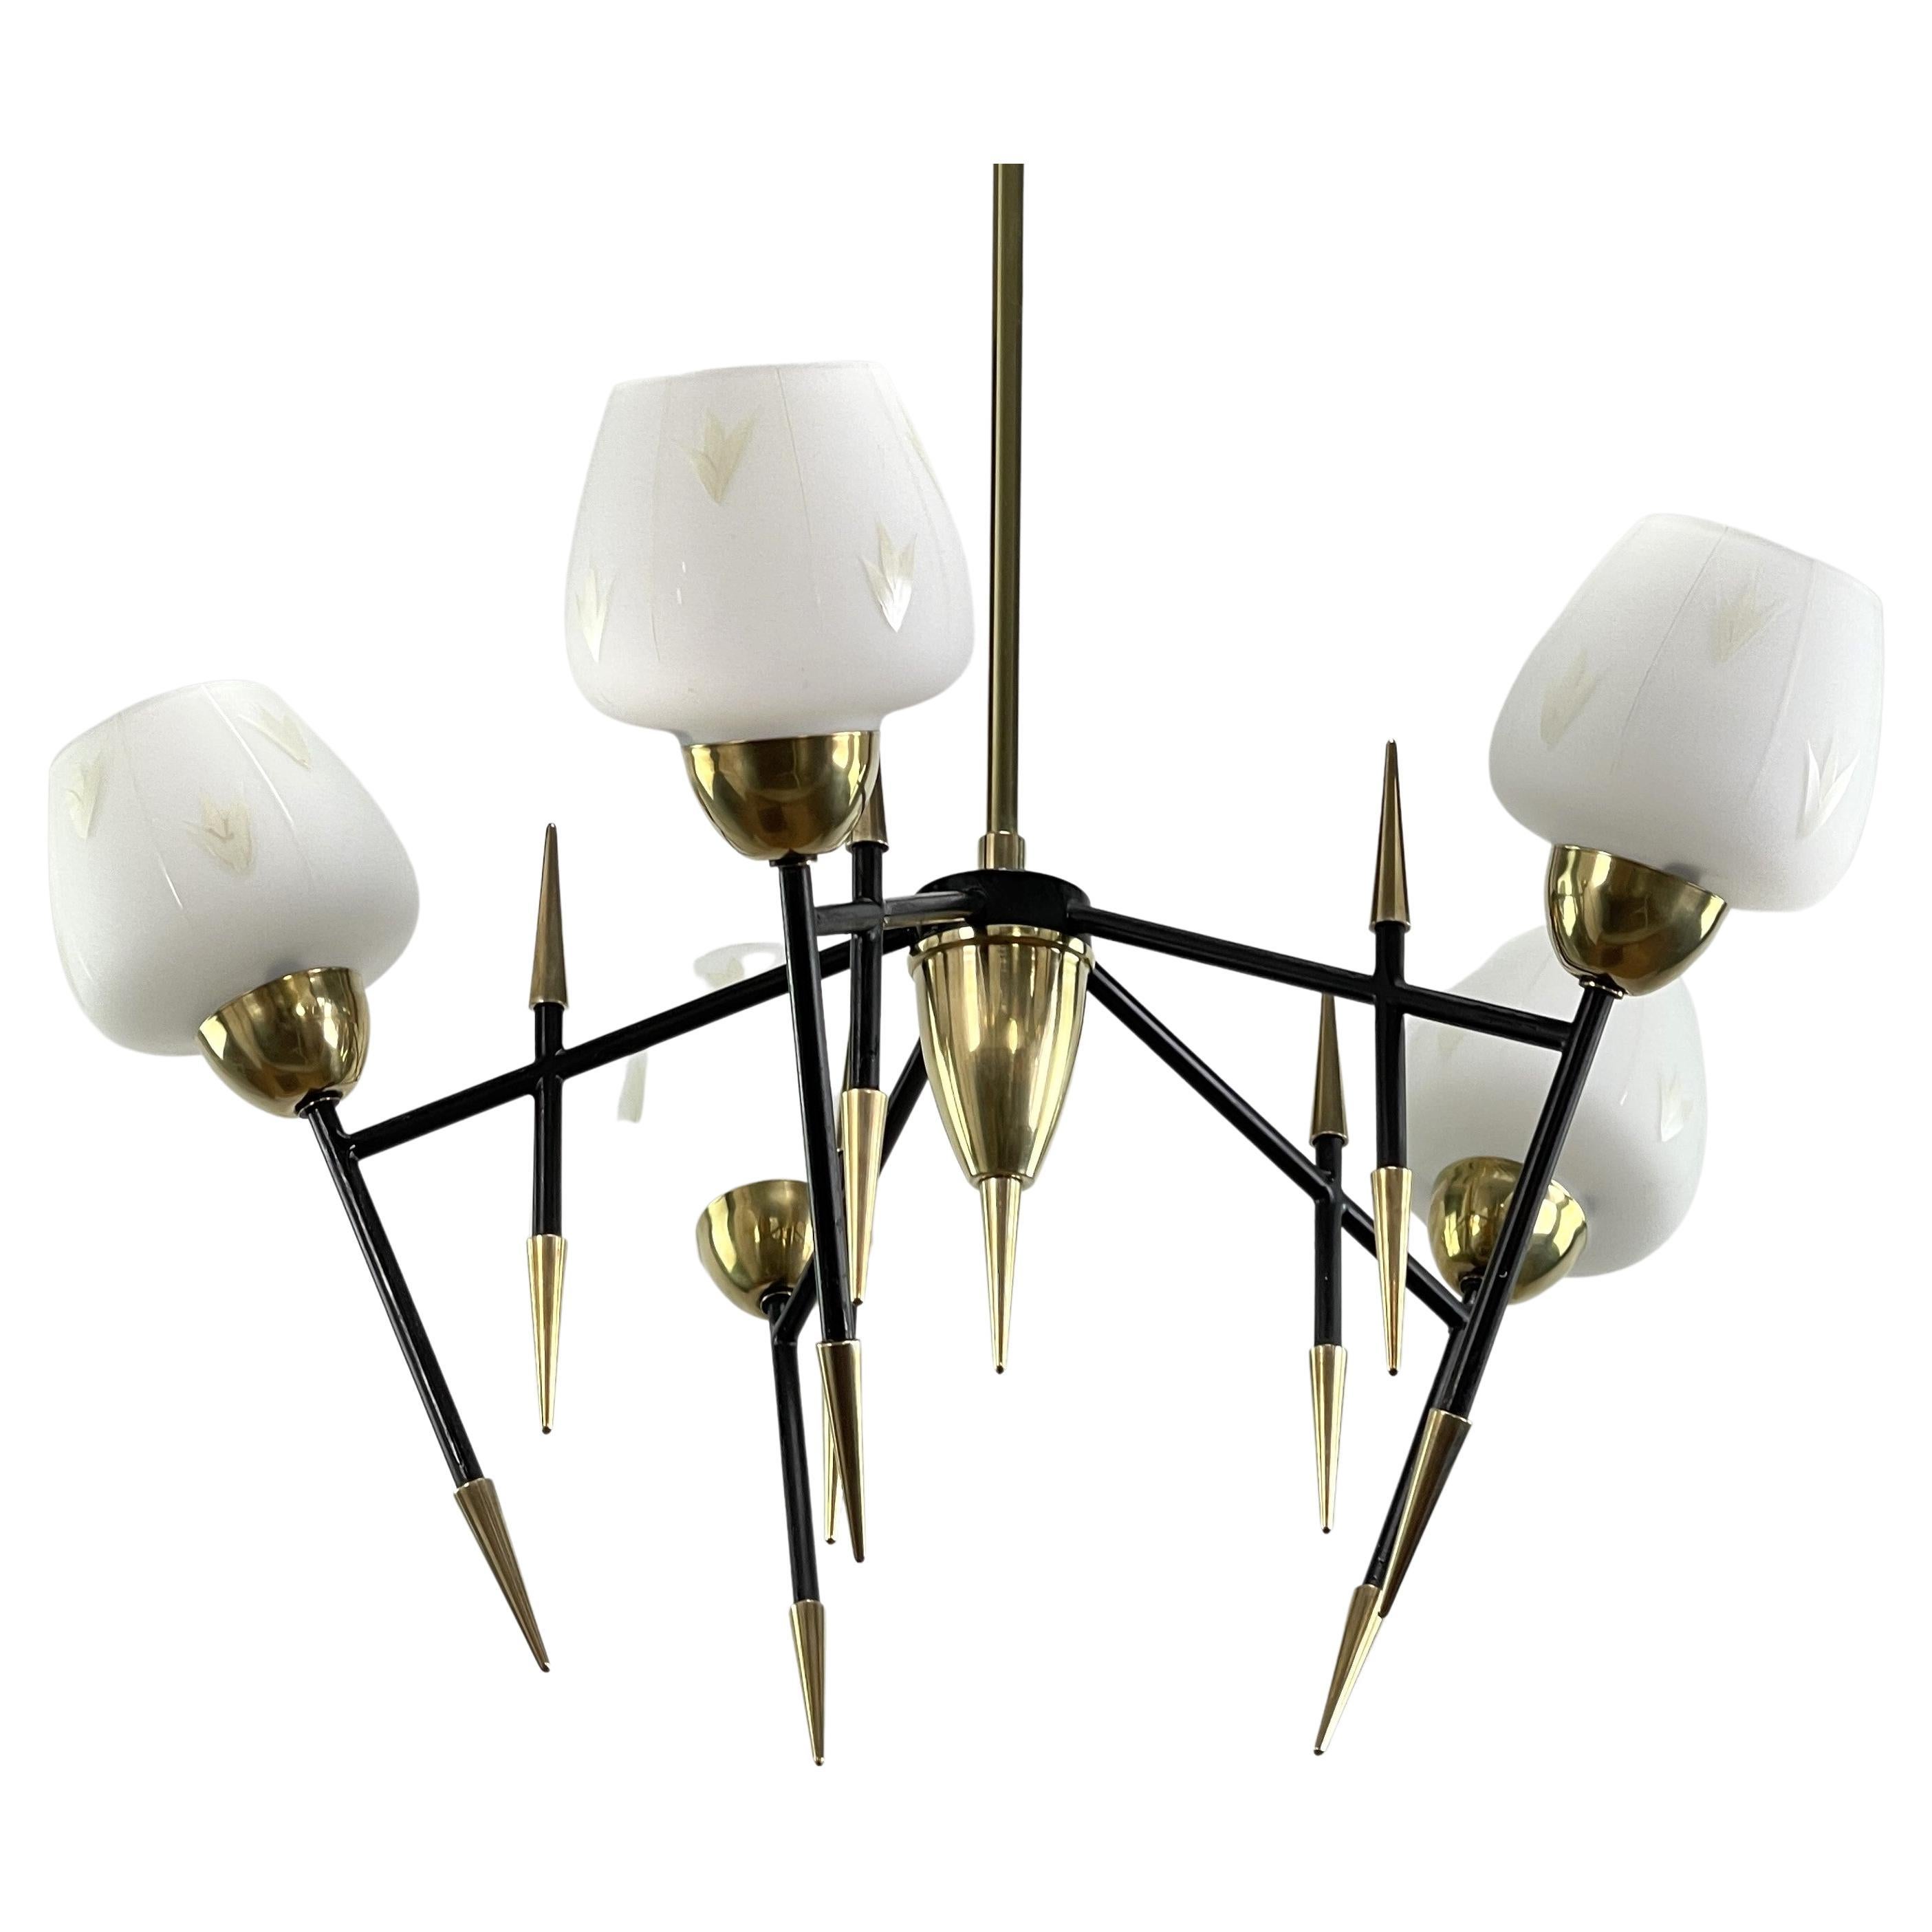 Mid-Century Sputnik Ceiling Lamp in the Style of Maison Lunel, 1950s For Sale